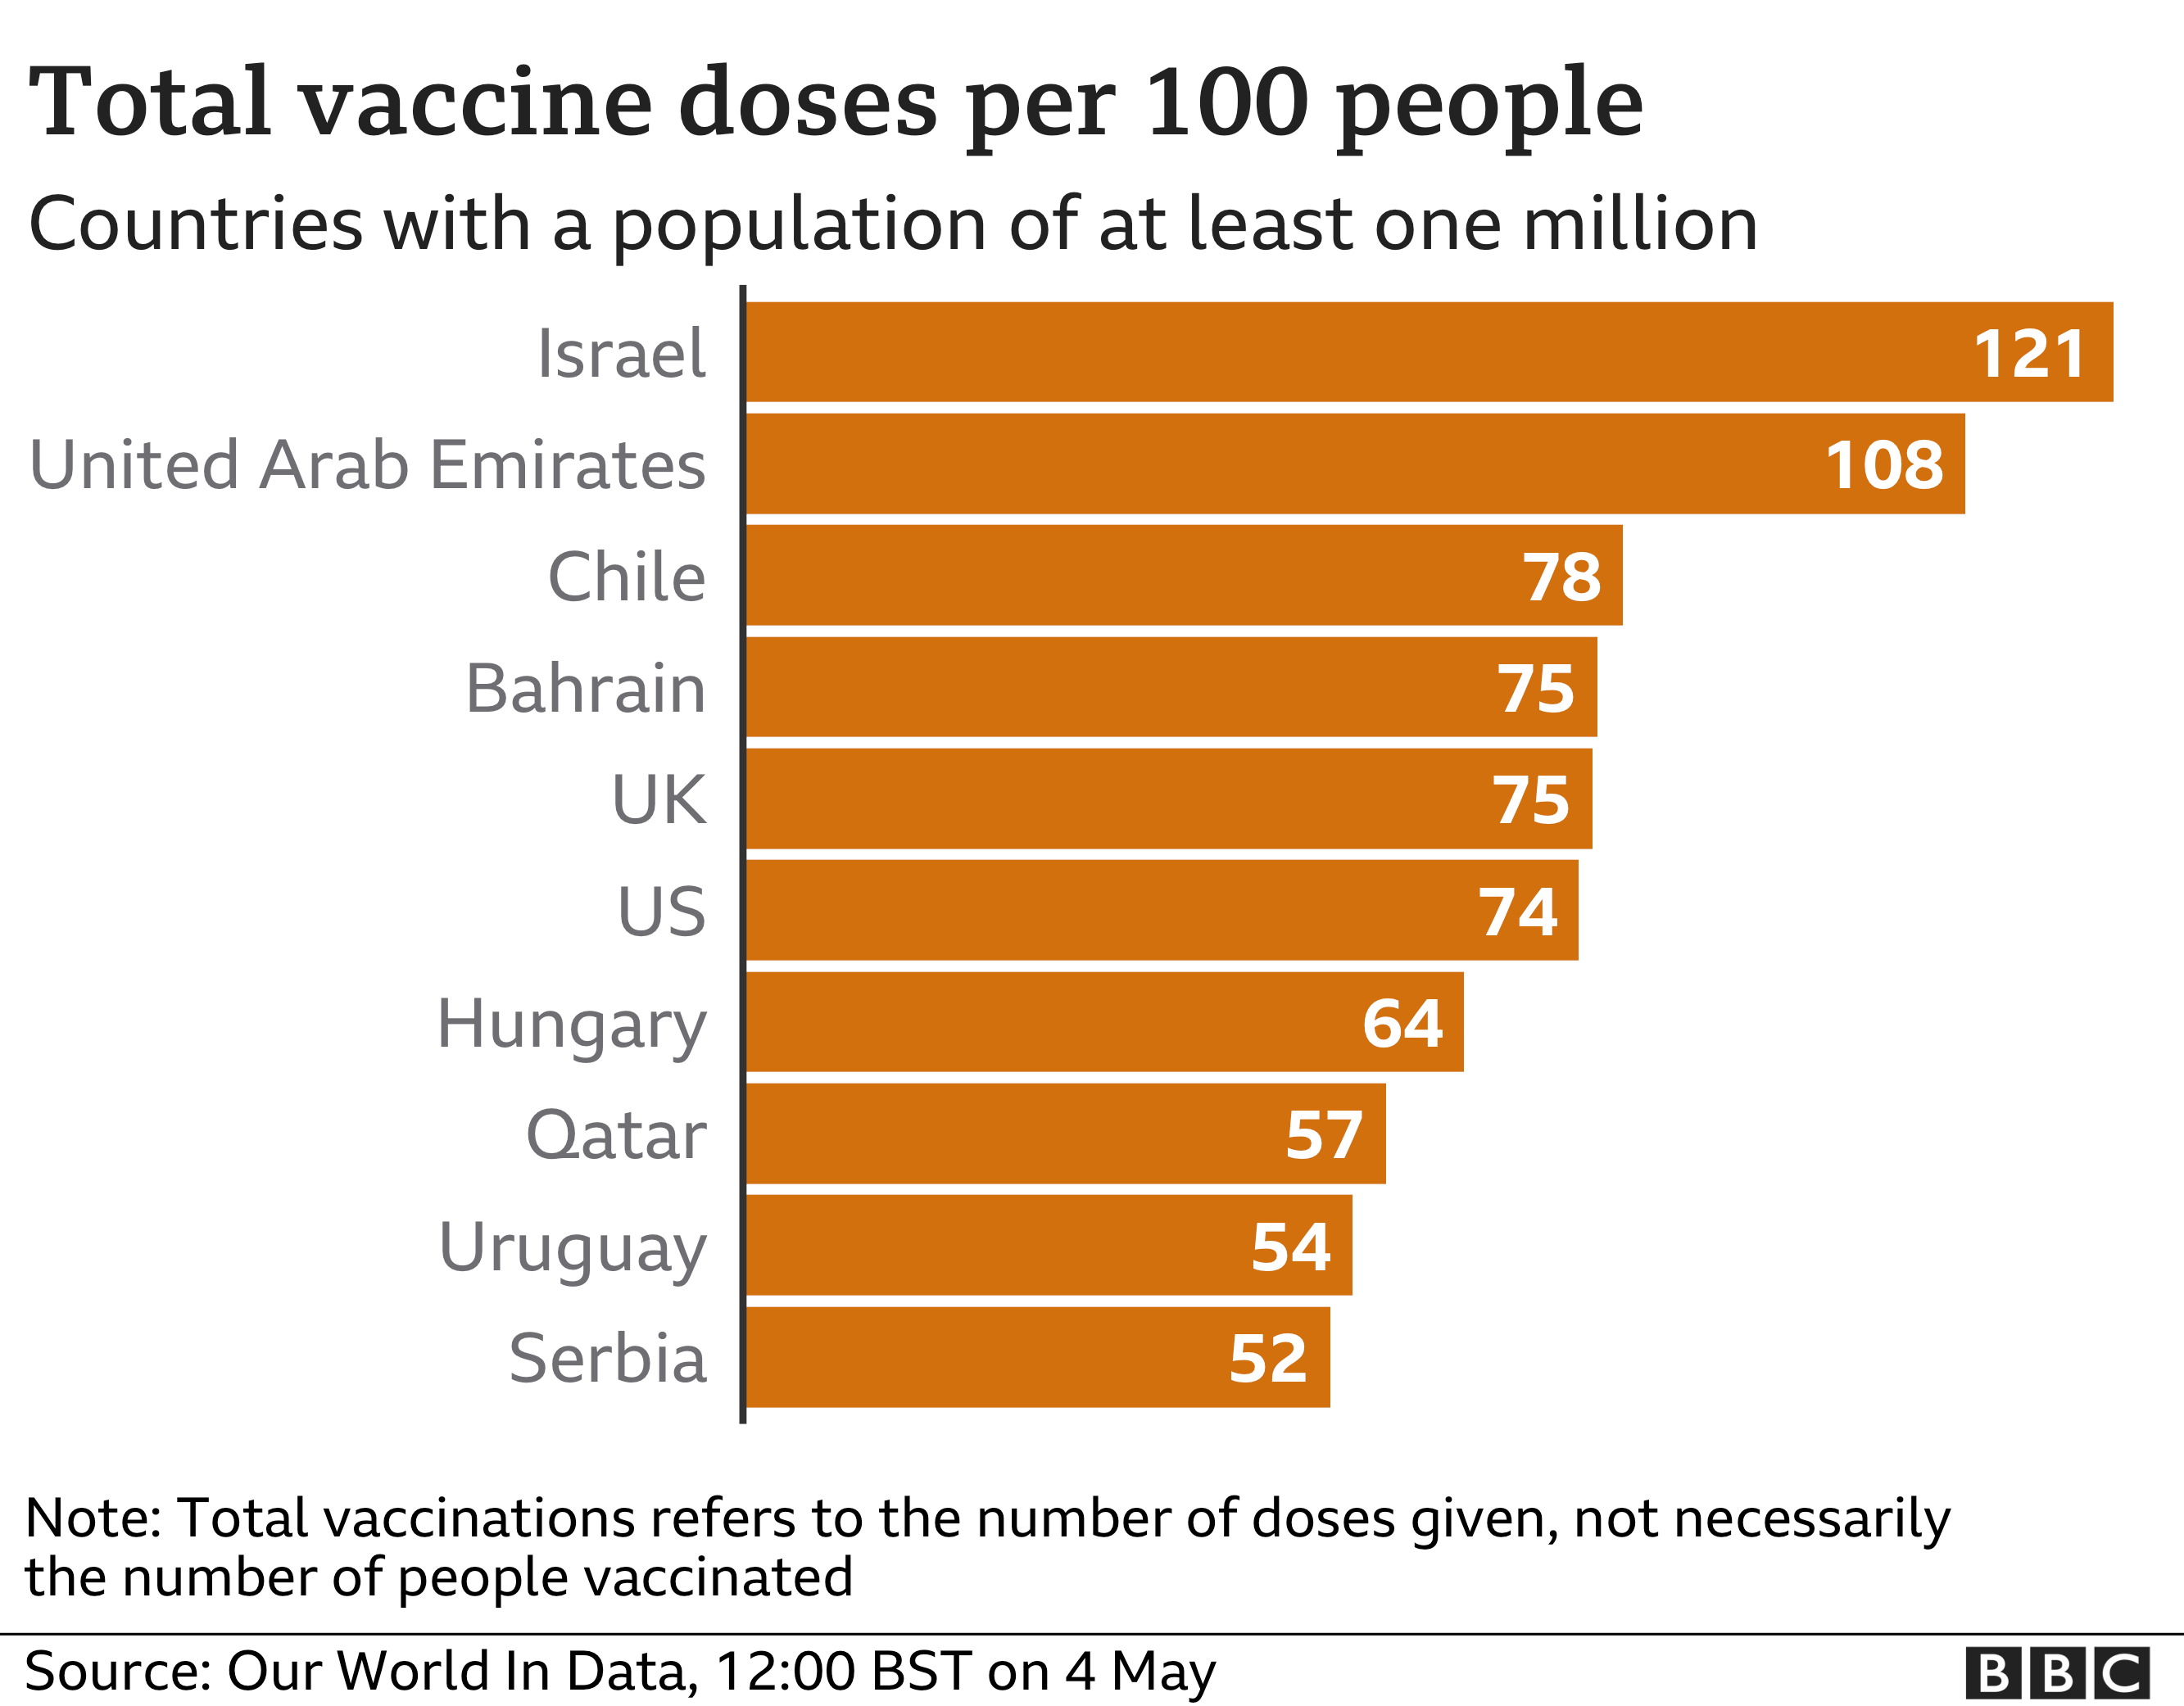 Chart showing vaccine doses per 100 people in countries where the population is over one million.